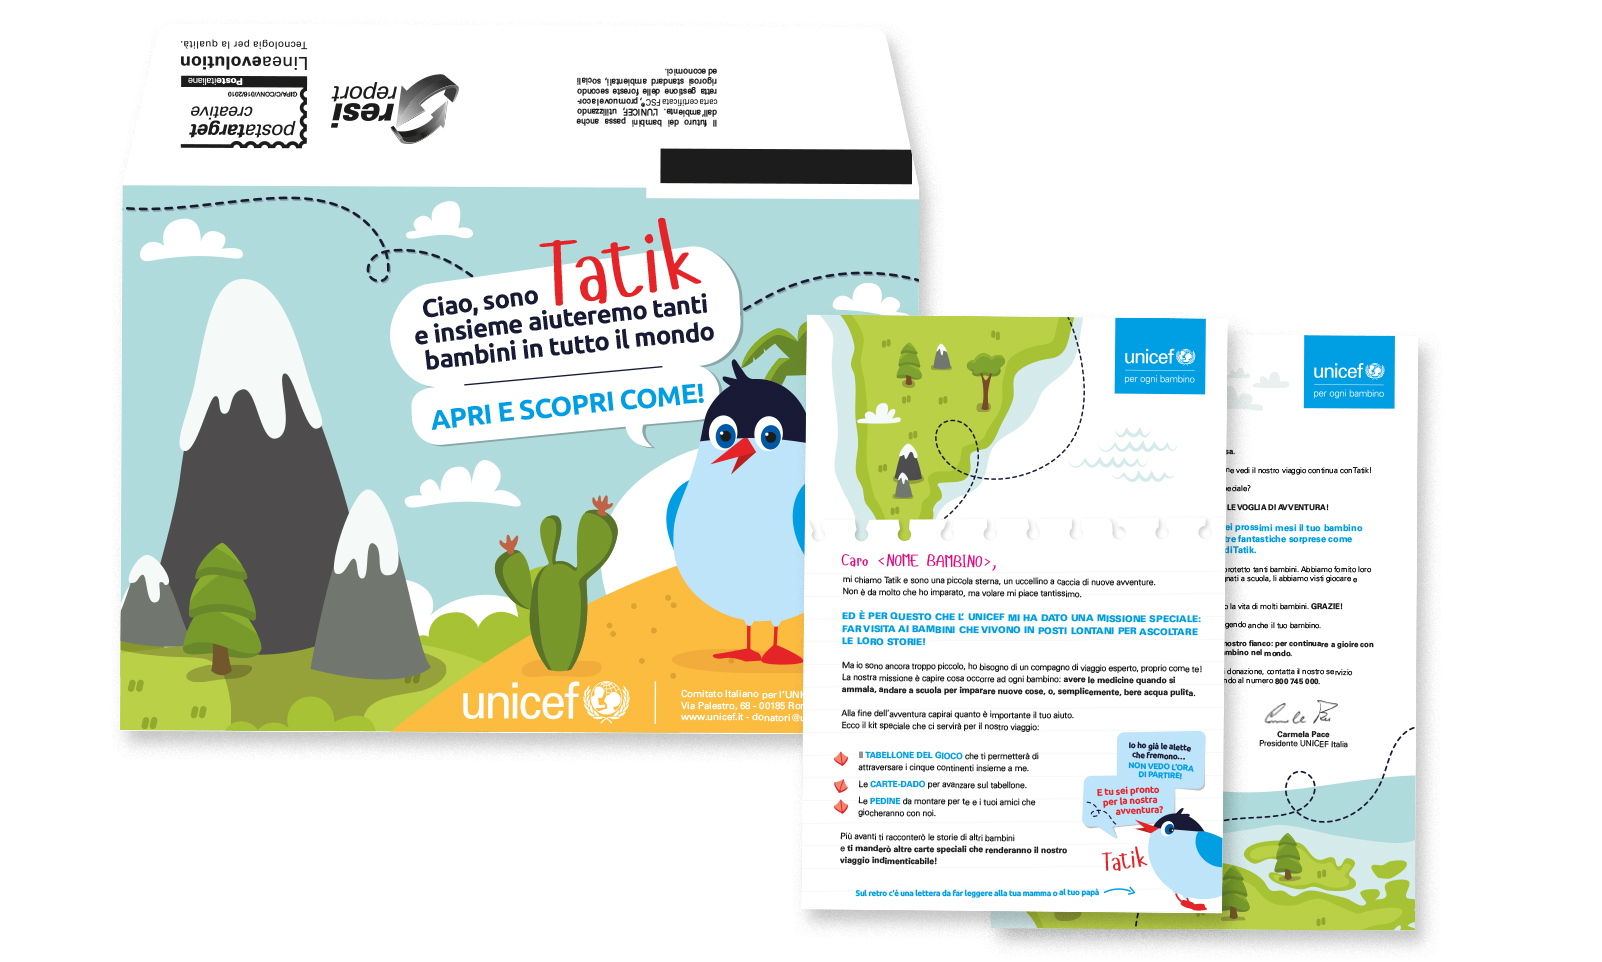 Unicef Preview_01